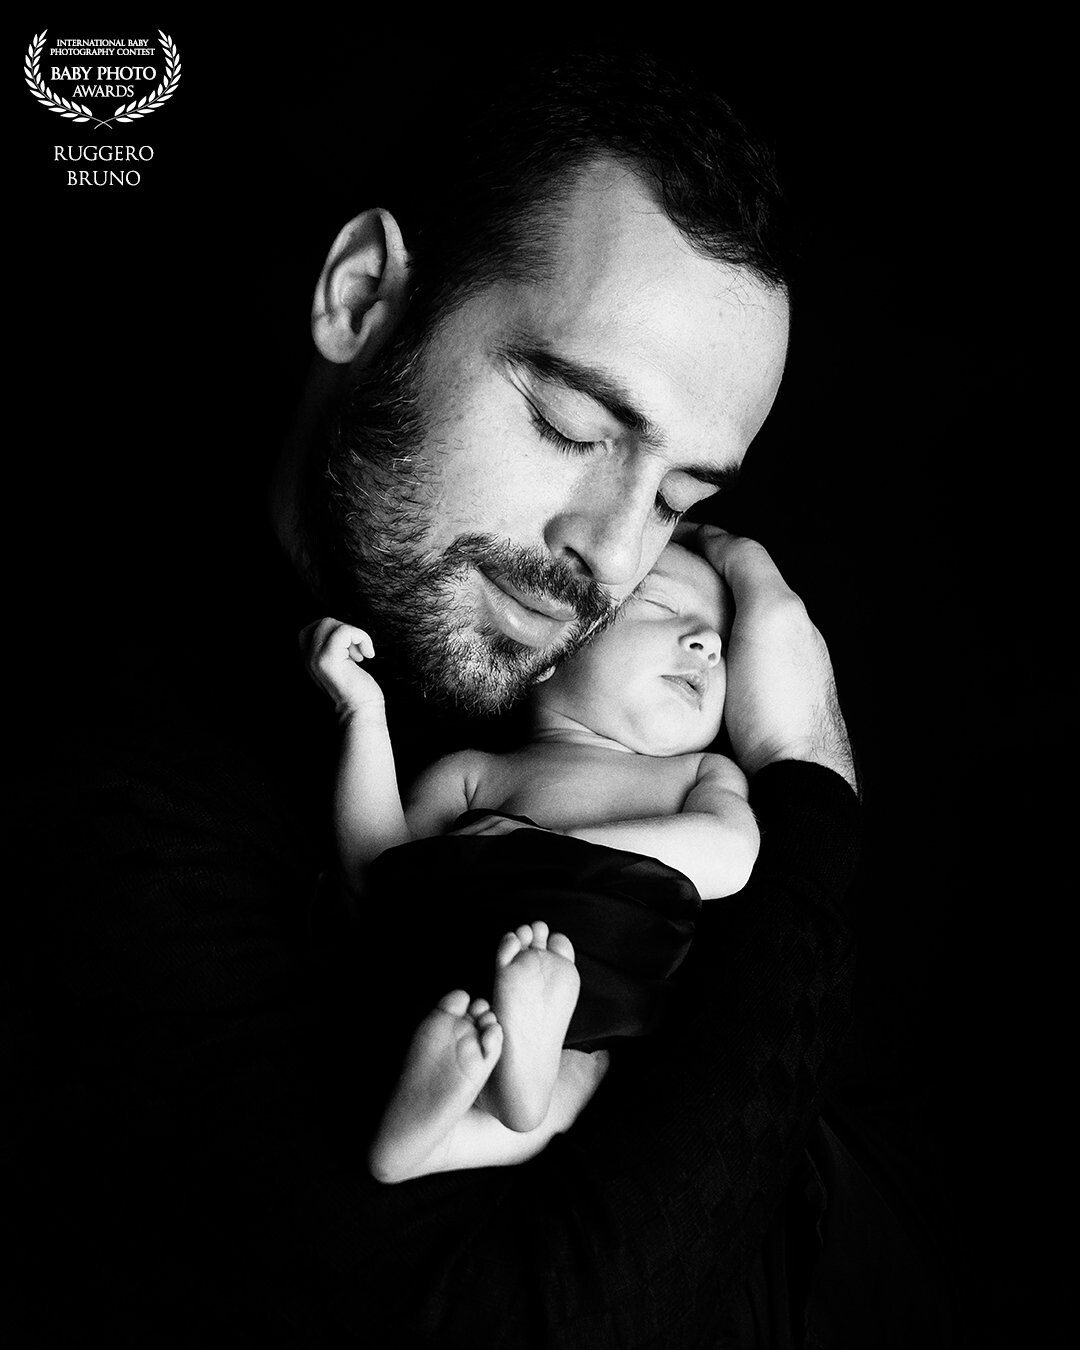 The first hug                             <br />
<br />
Daddy's arms are the safest place the little one knows! <br />
A shot to never forget . . .